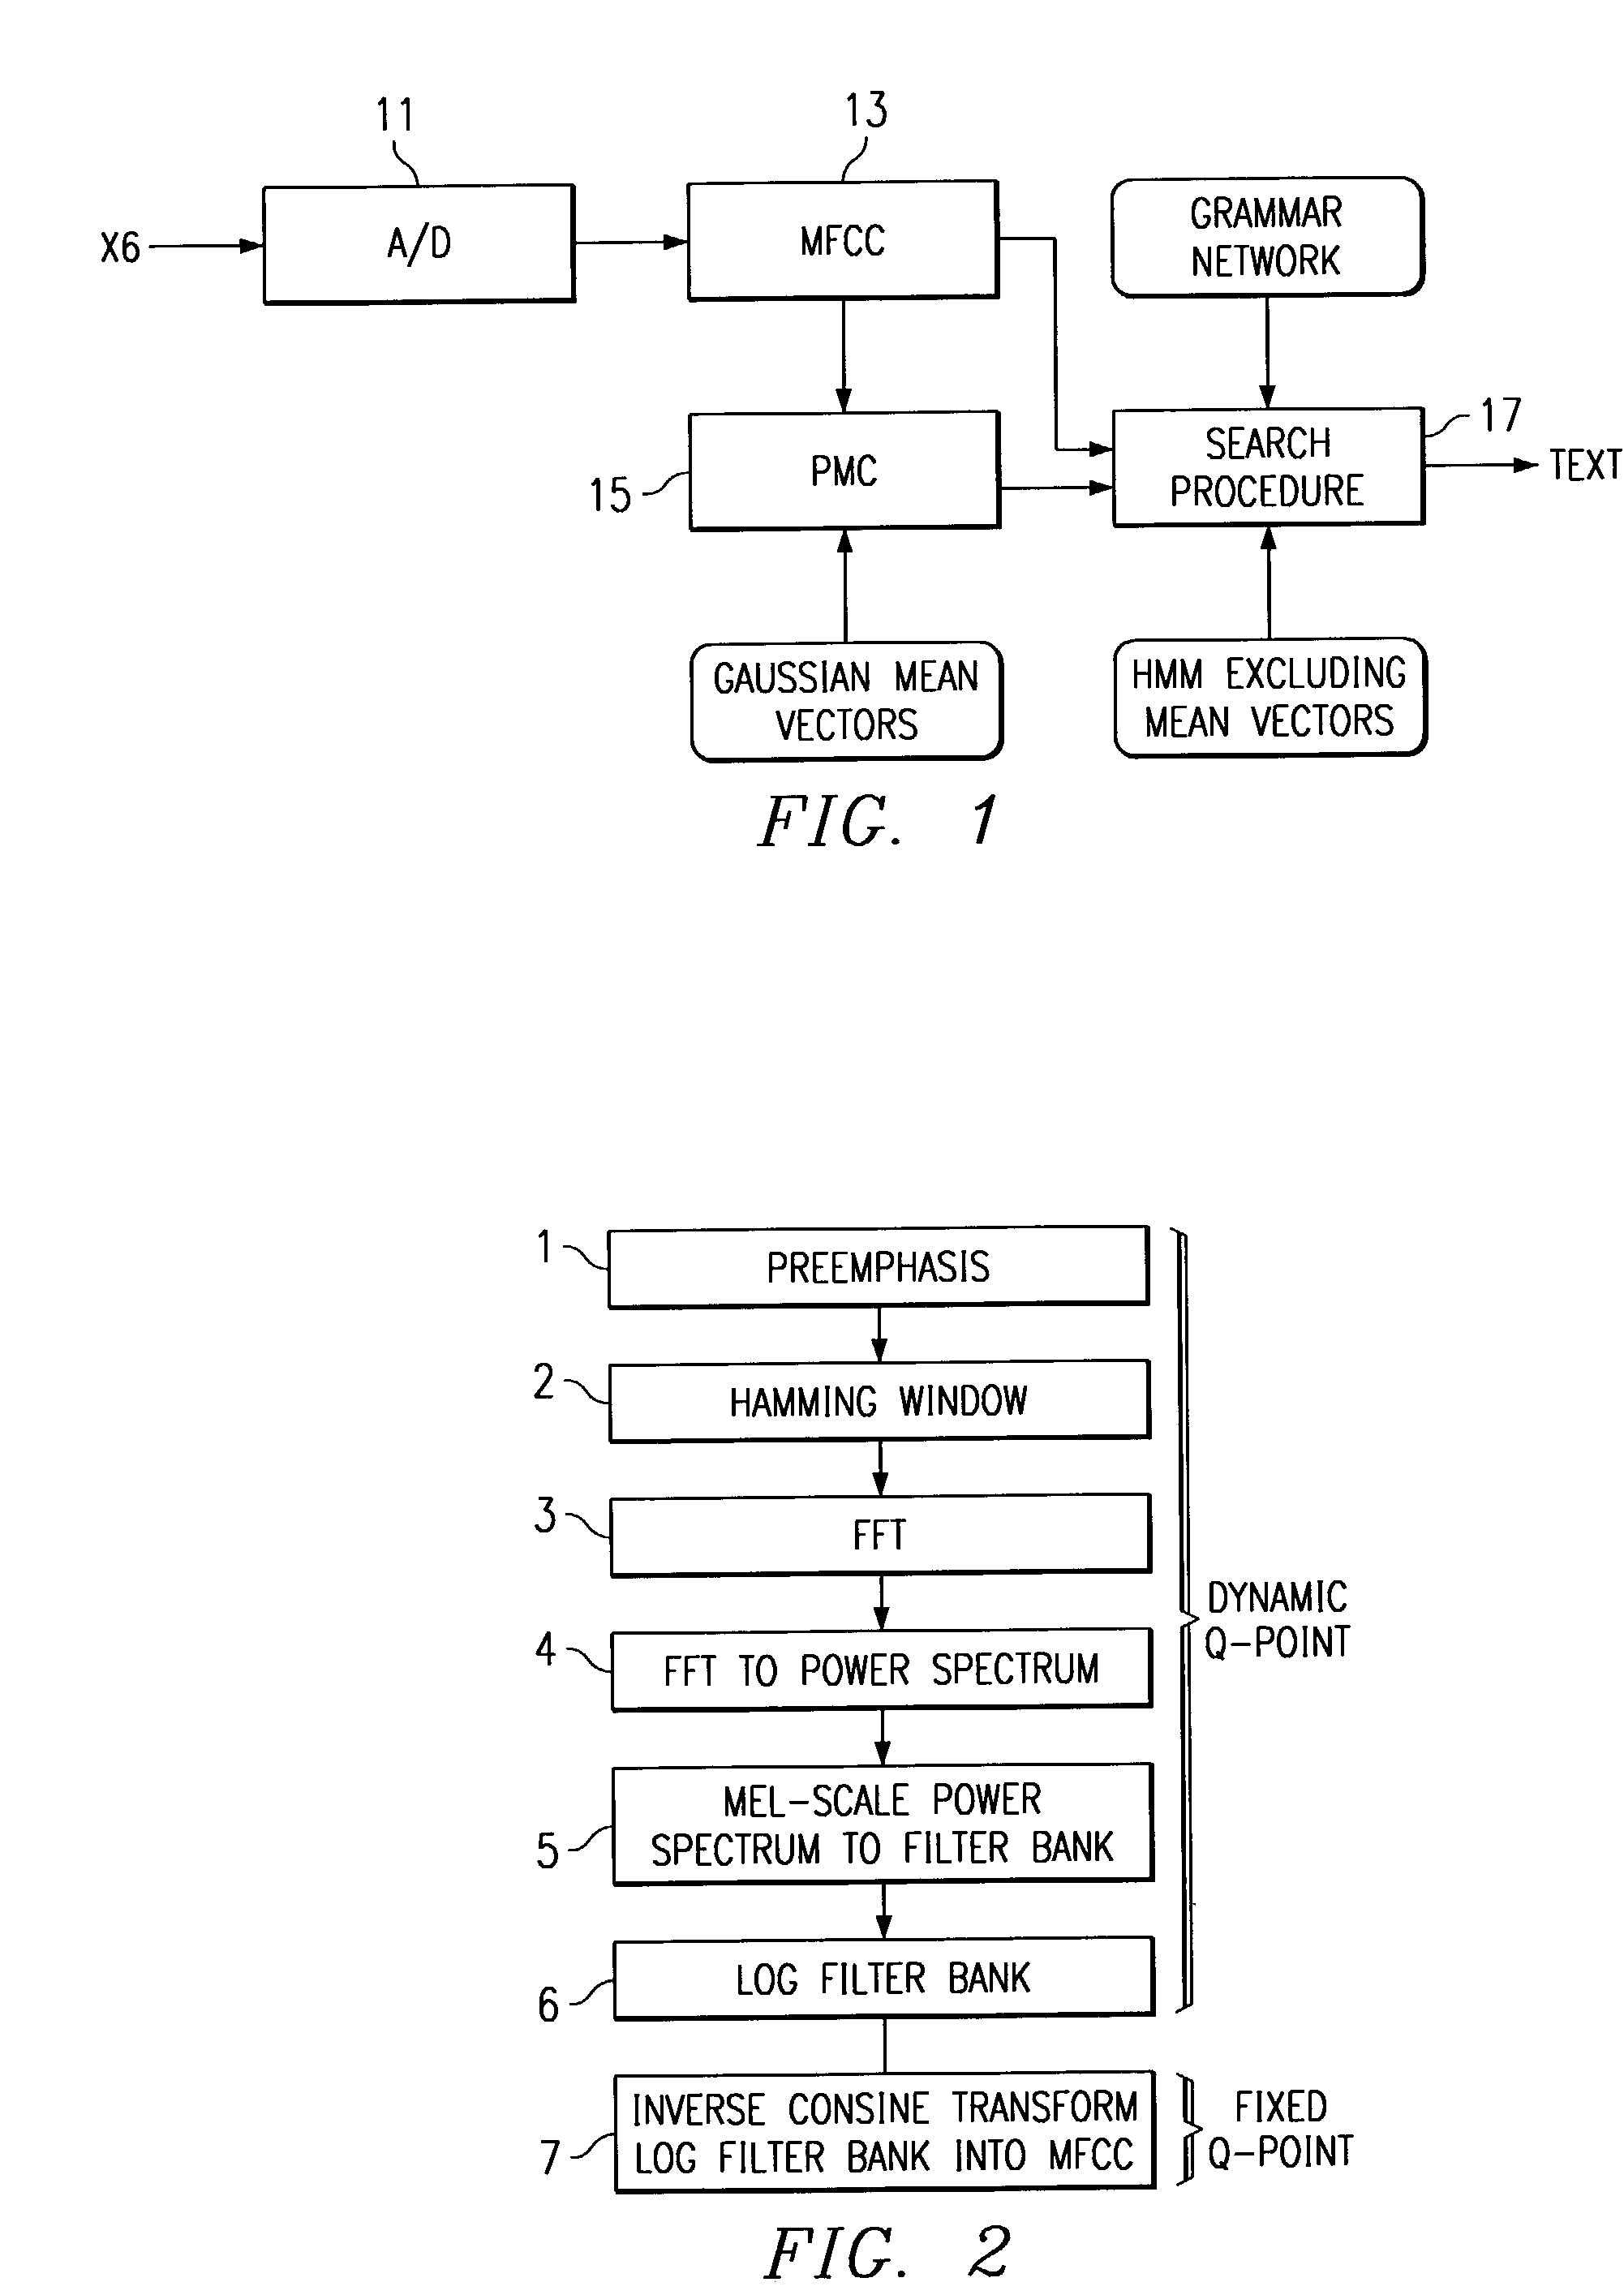 Implementing a high accuracy continuous speech recognizer on a fixed-point processor